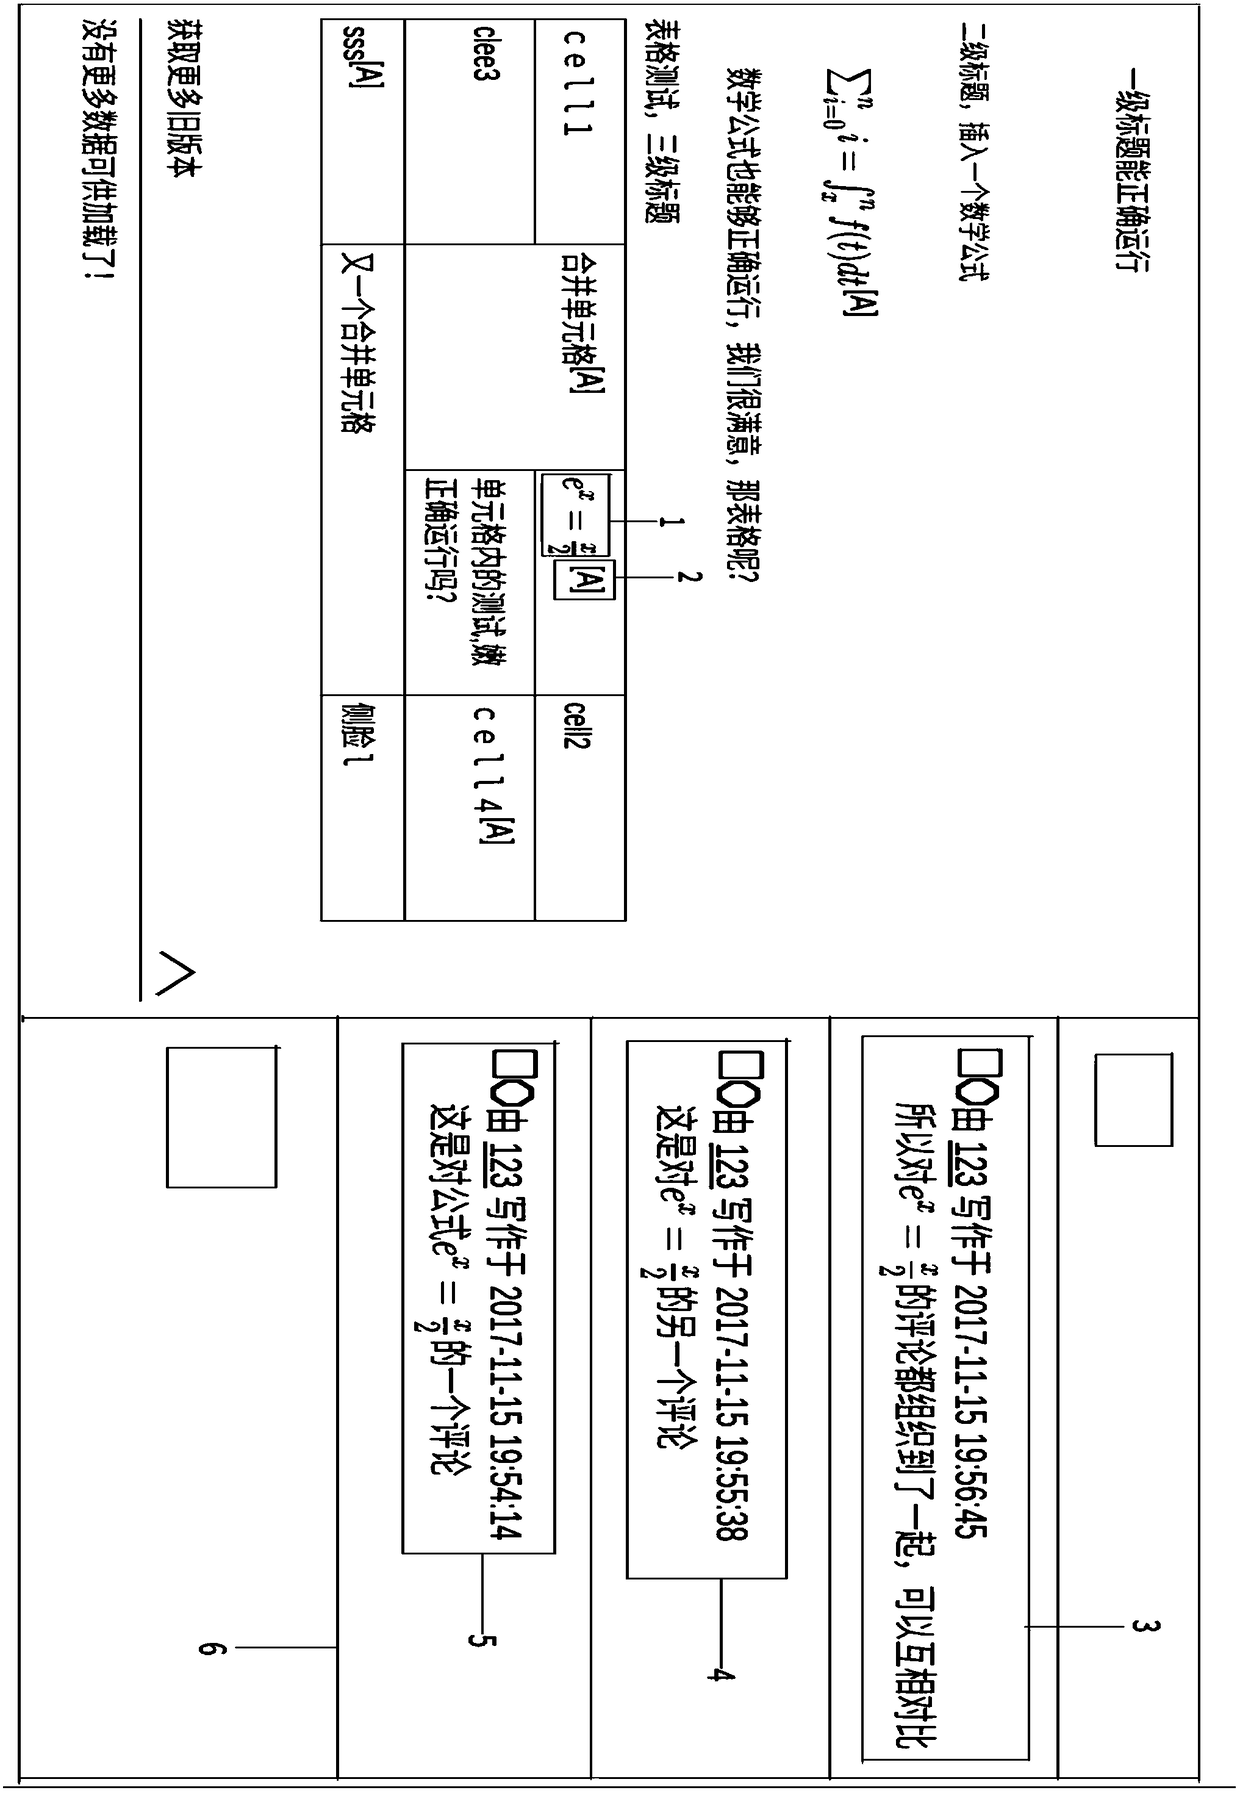 Method for independently adding position comments for web webpage articles